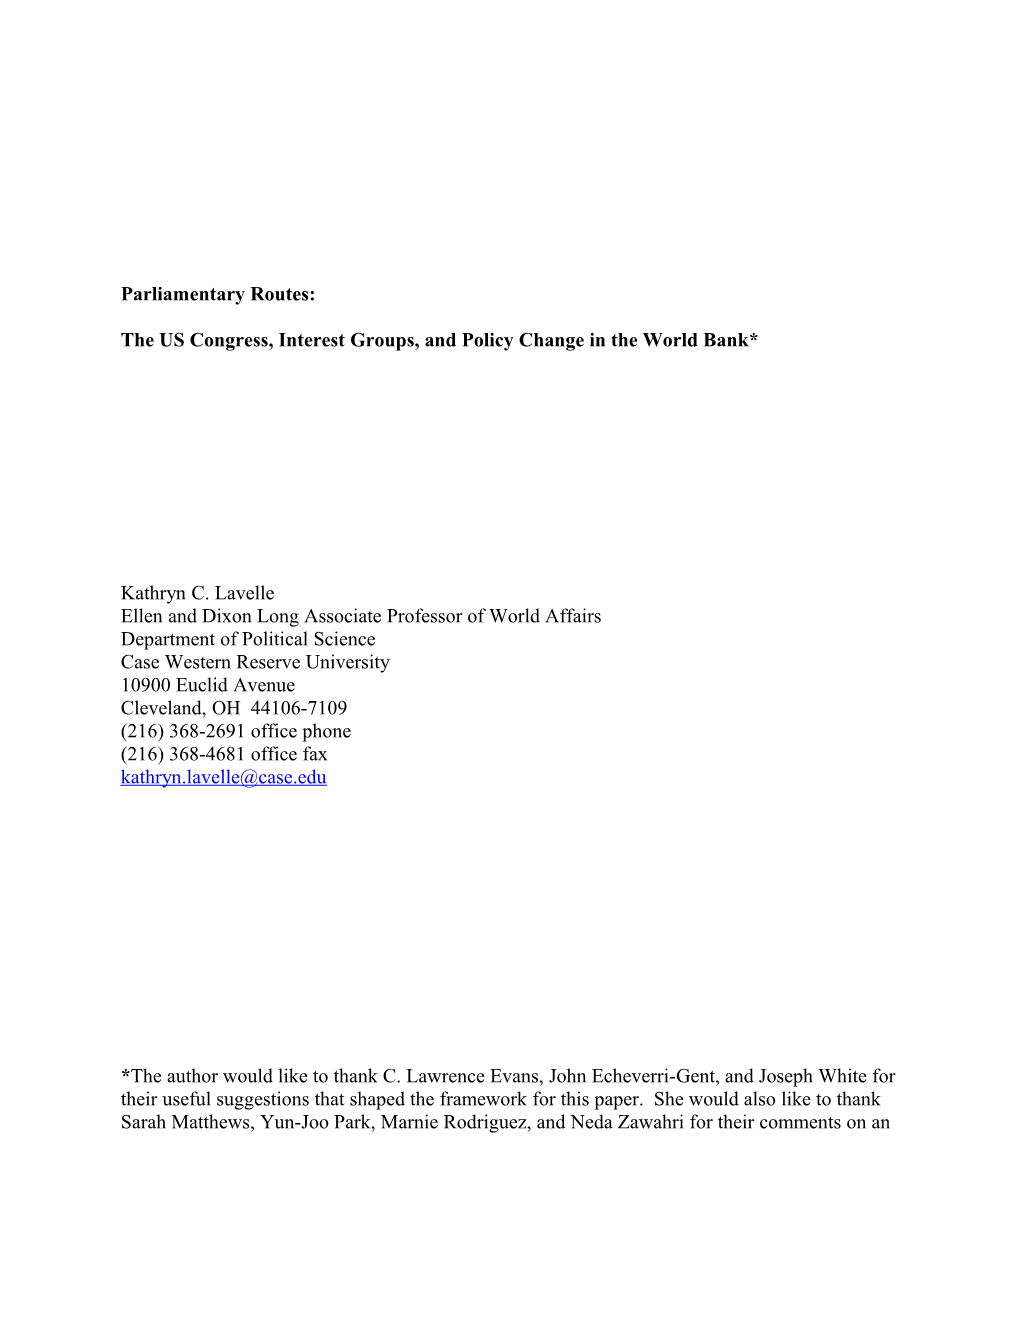 The US Congress, Interest Groups, and Policy Change in the World Bank*